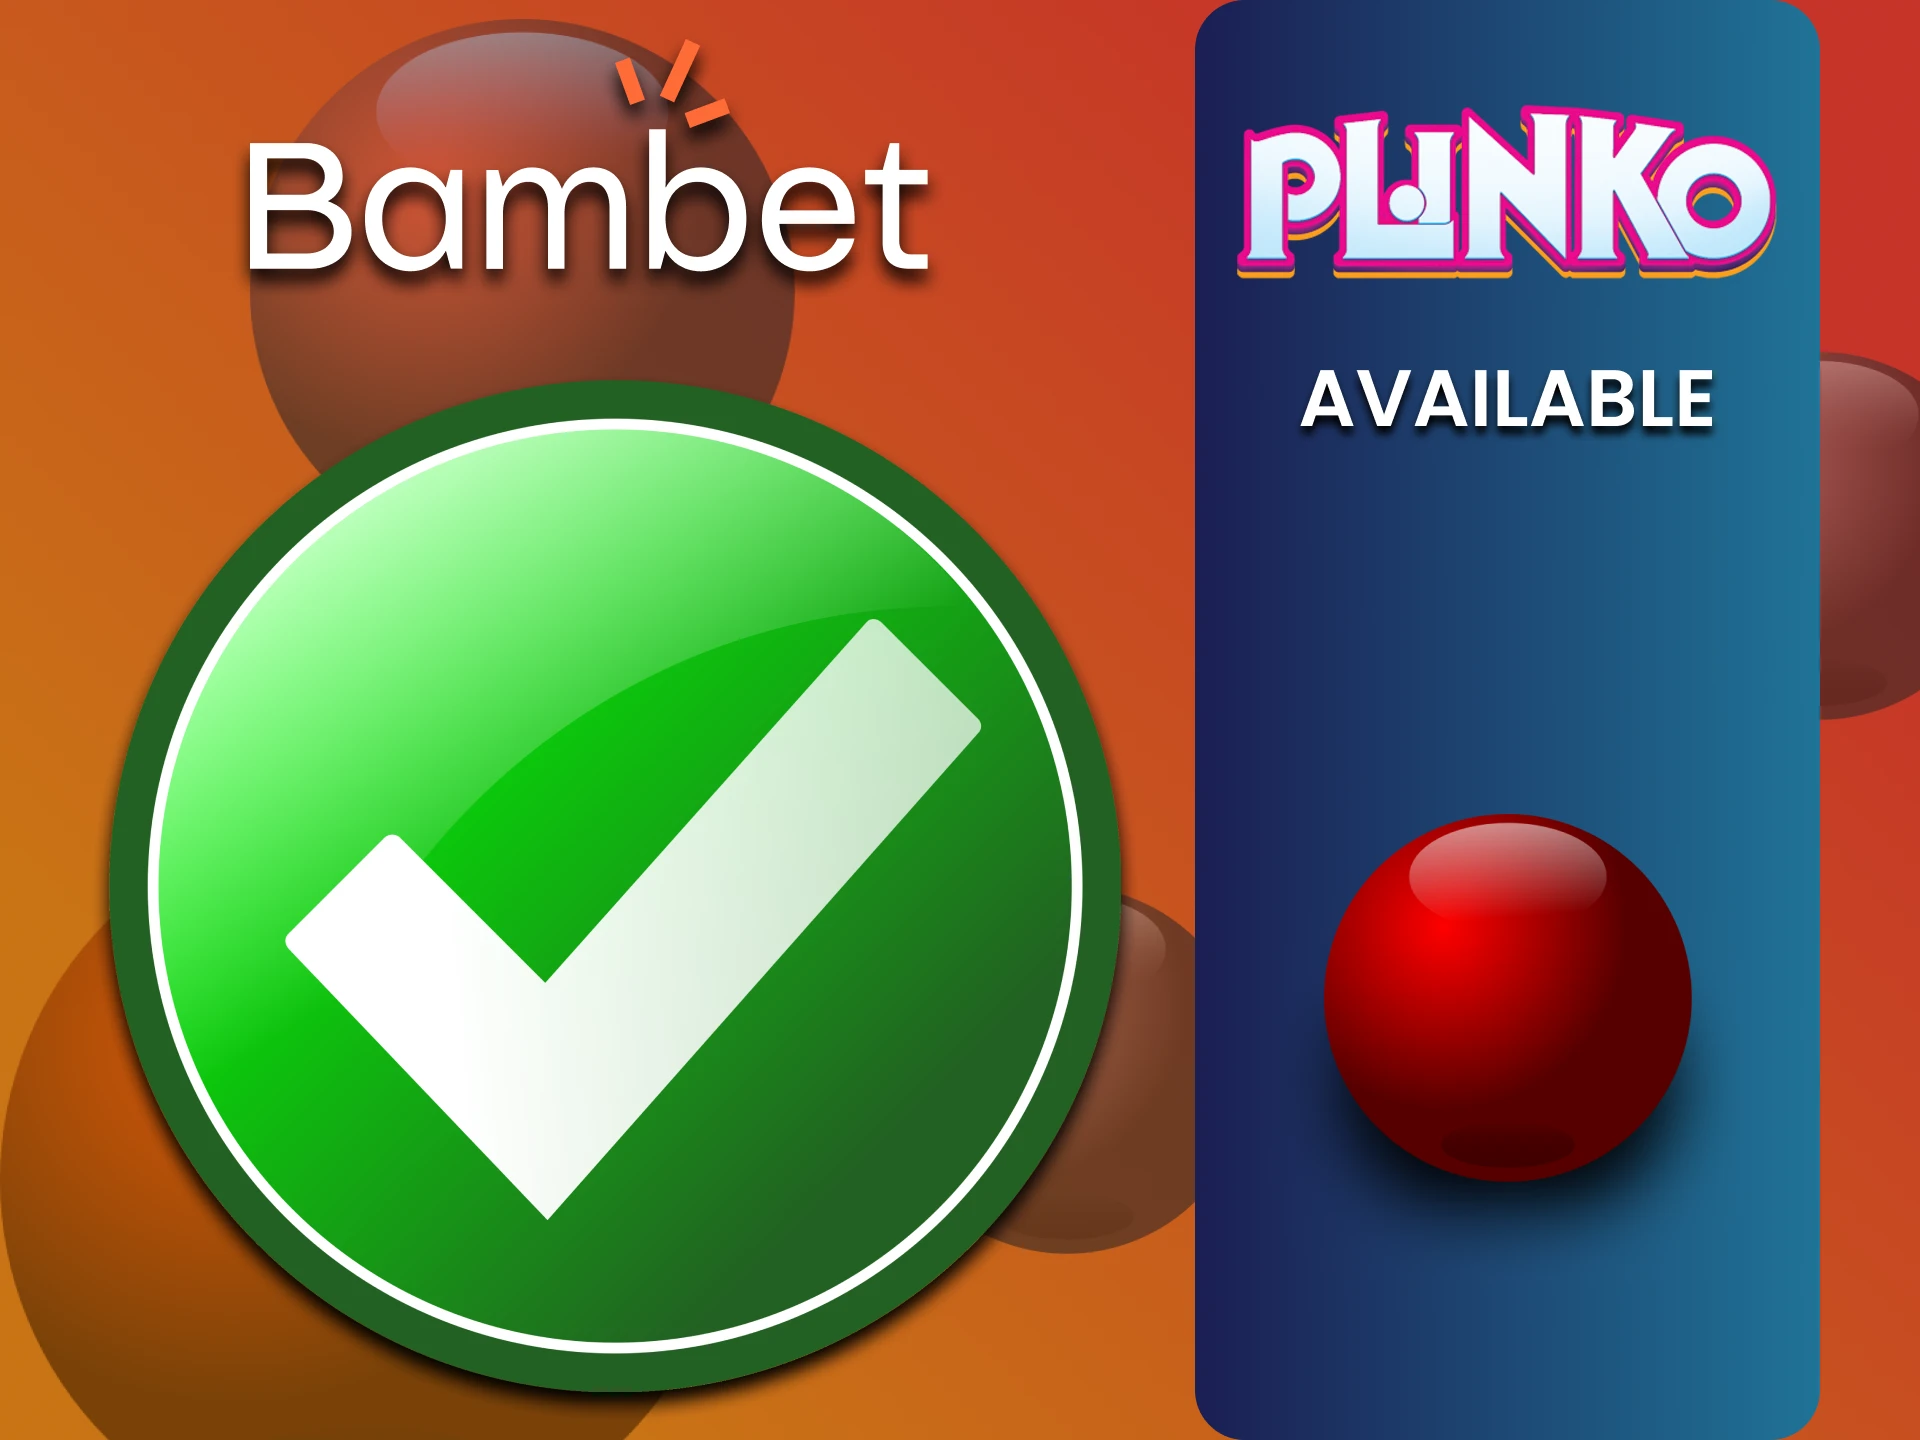 Choose your Plinko option from those available on the Bambet website.